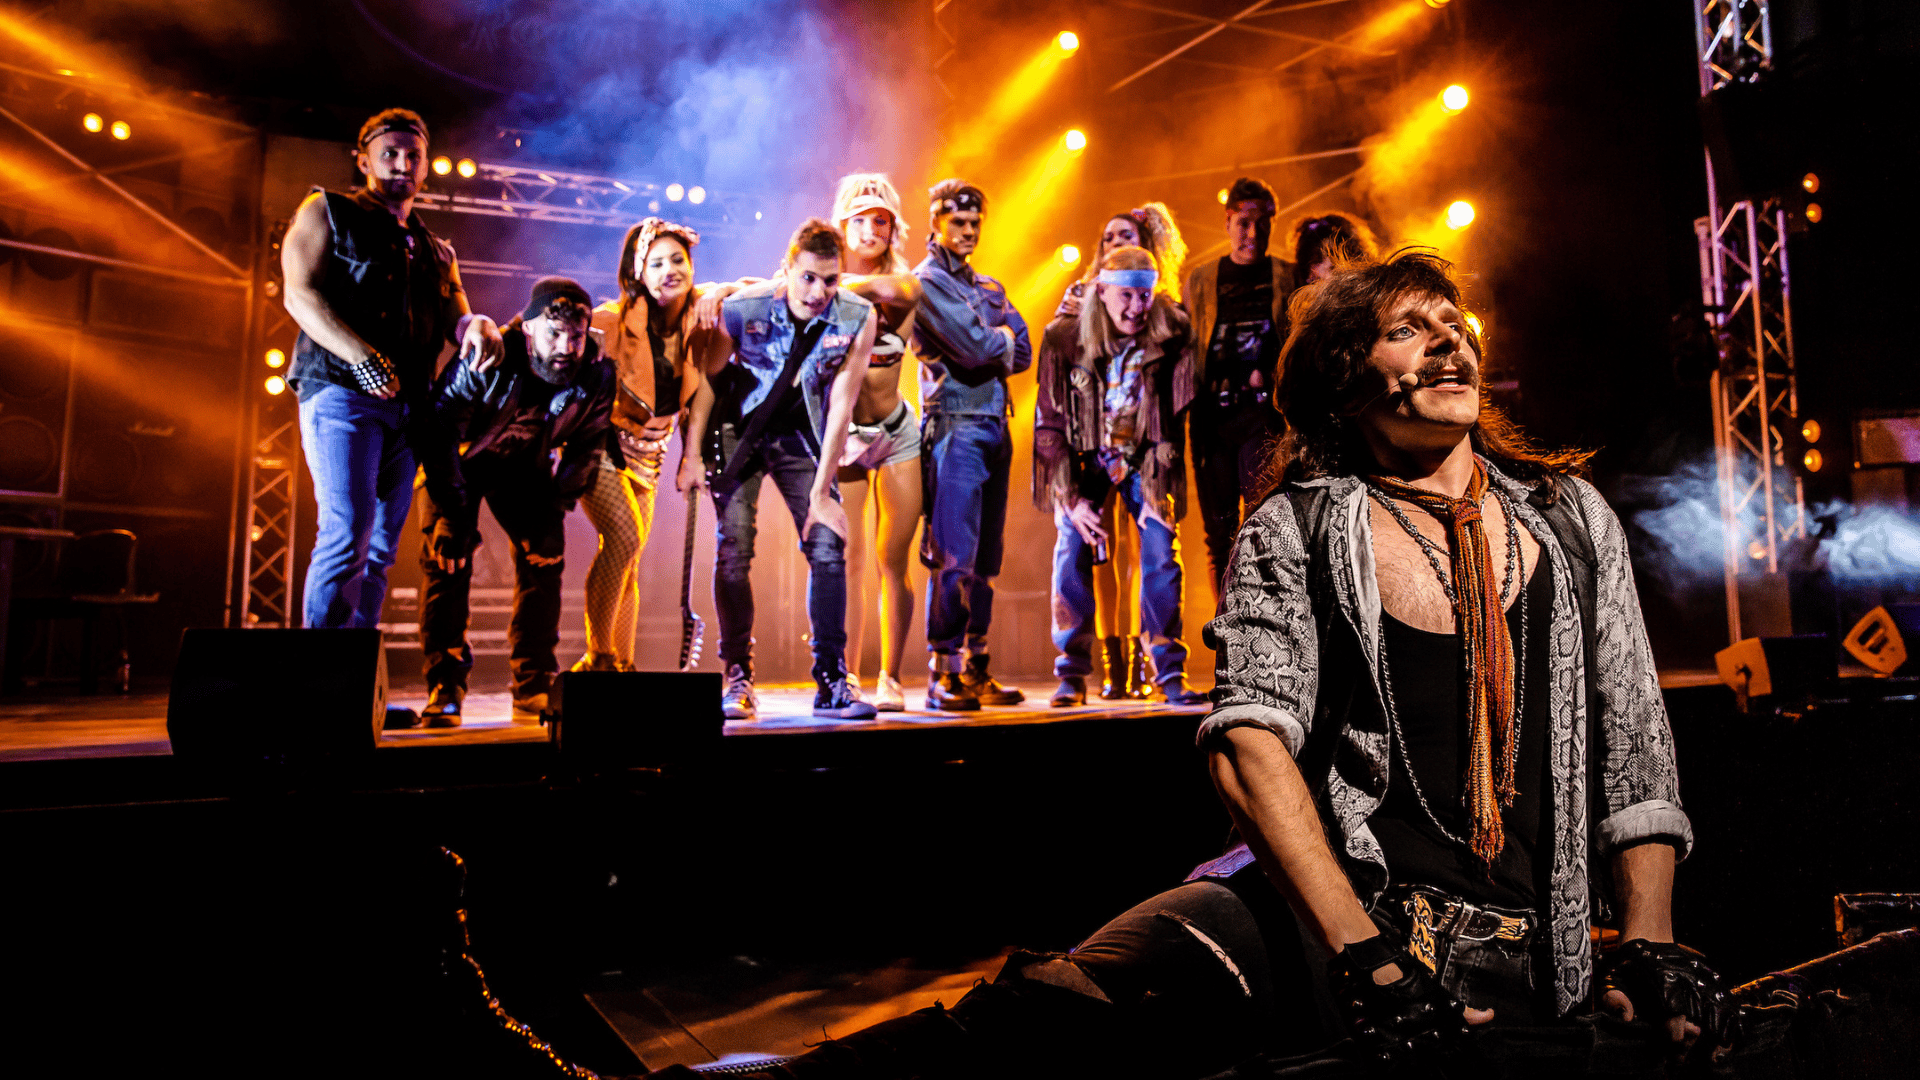 Rock of Ages production shot: a male actor sits on the edge of the stage, staring off into the audience, while the other cast members stand behind